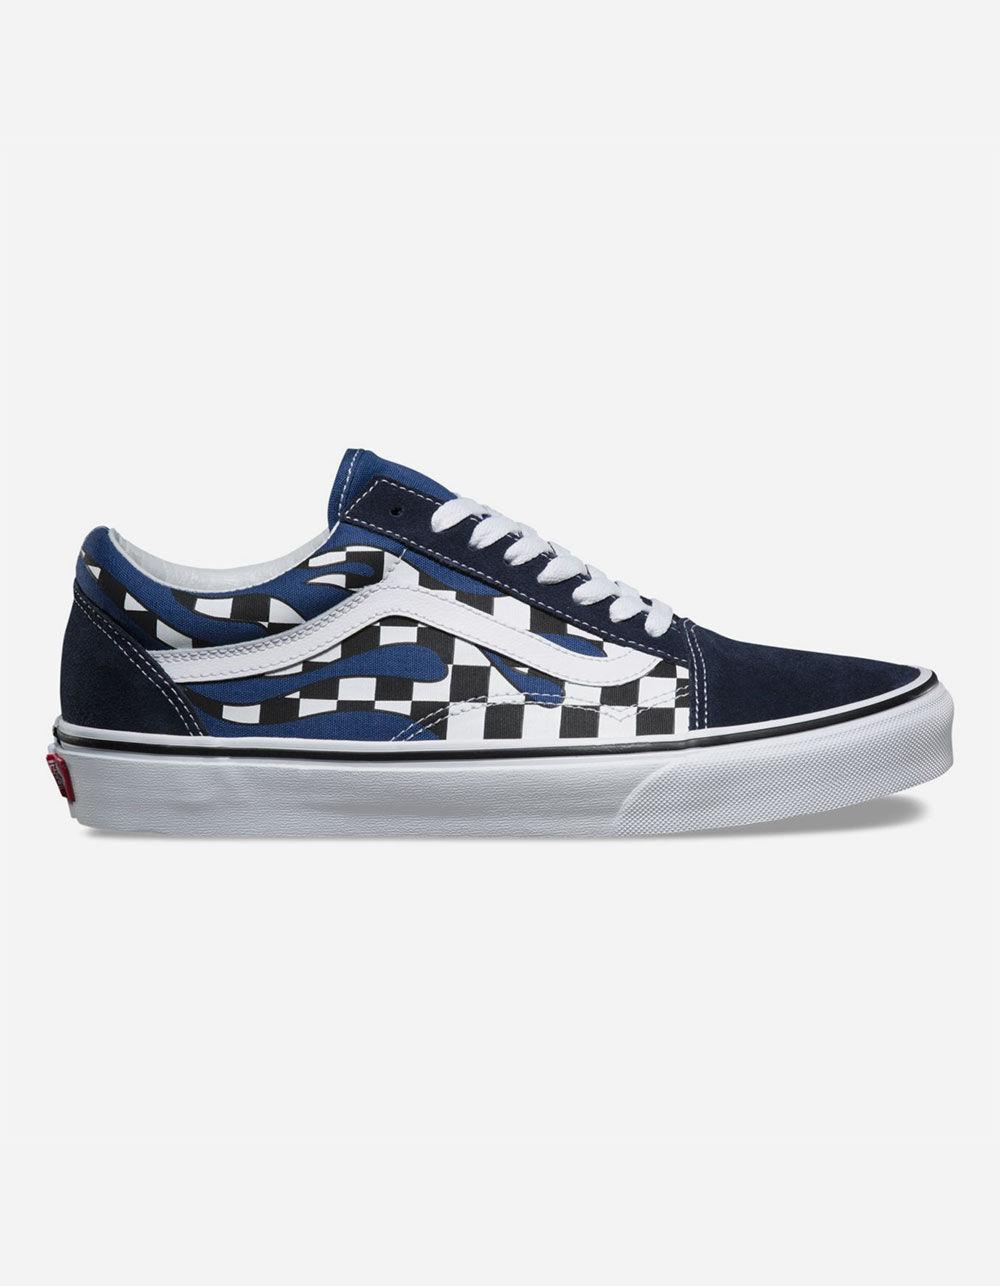 Vans Canvas Checker Flame Old Skool Navy & True White Shoes in Blue for Men  - Lyst